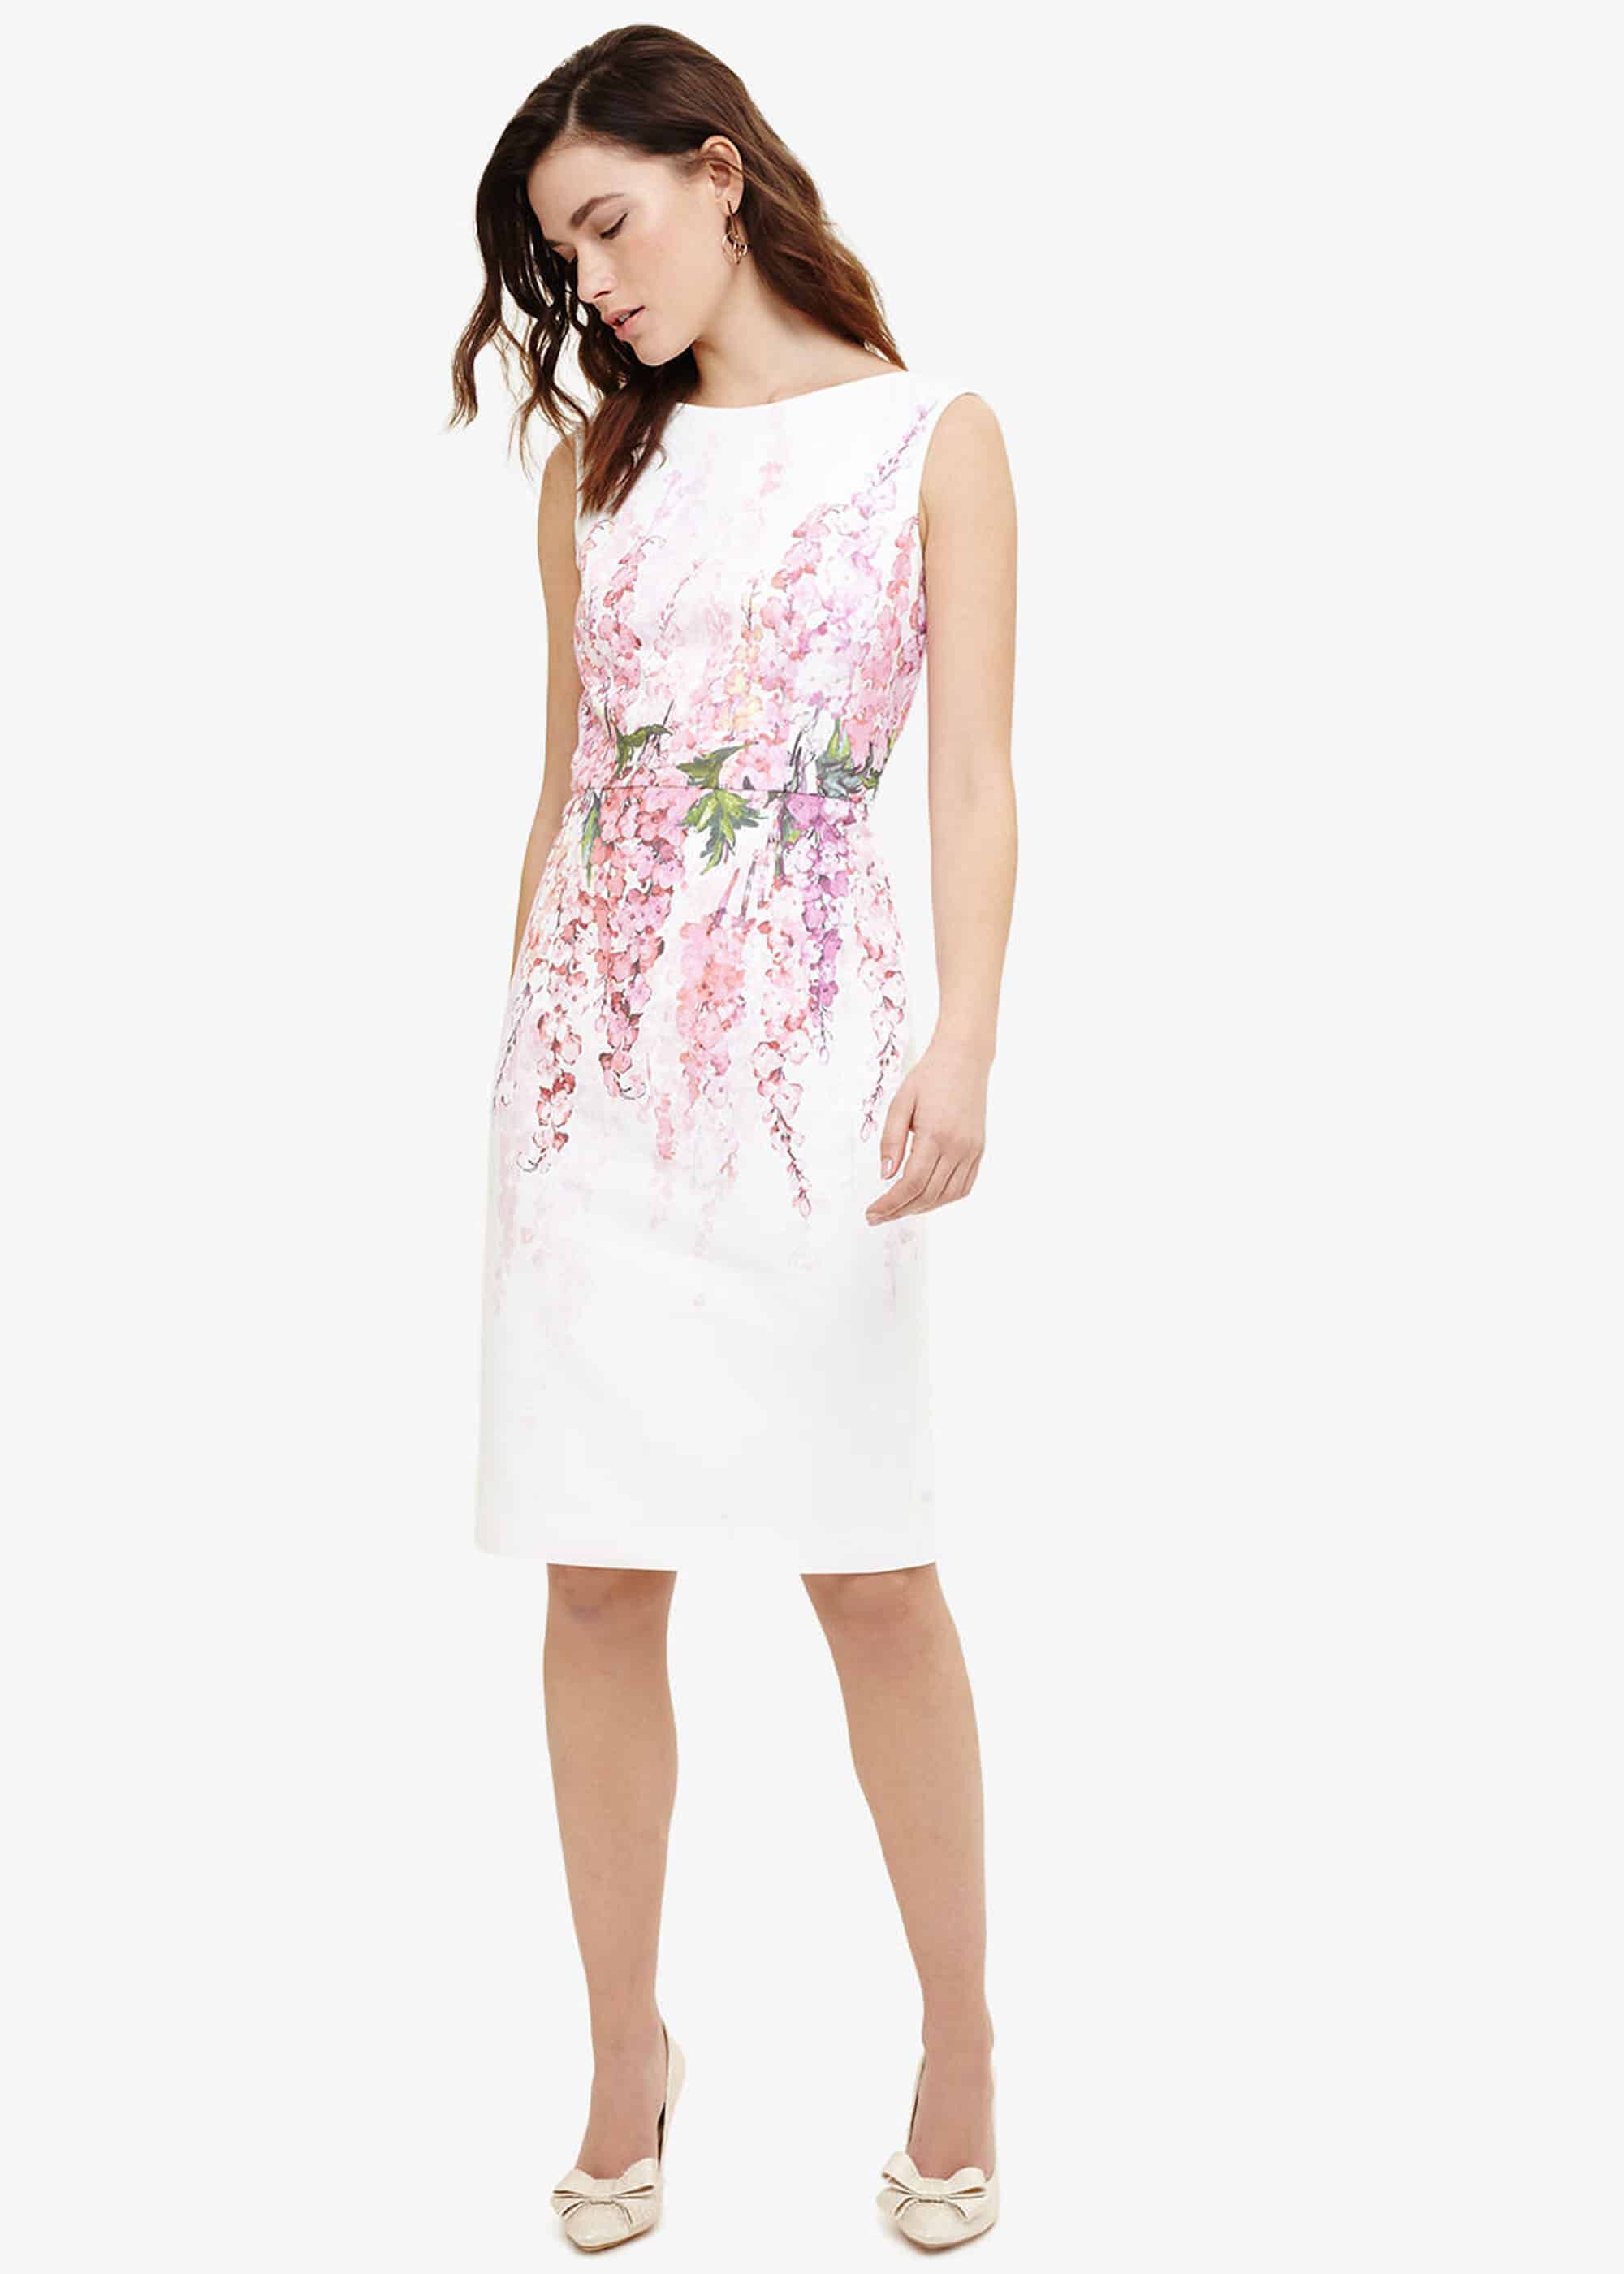 phase eight pink floral dress Big sale - OFF 66%